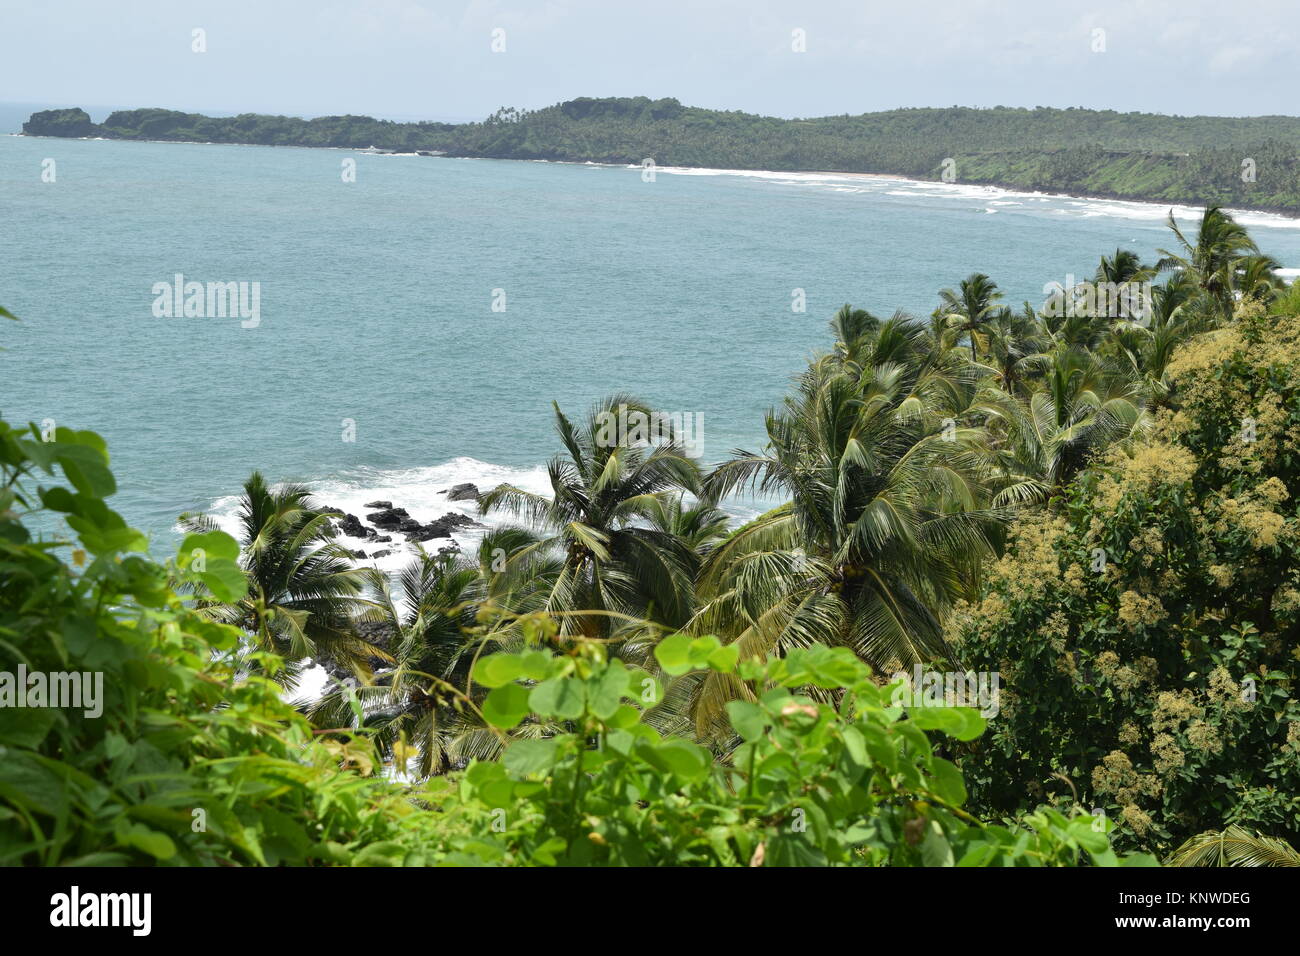 Sea view from mountain. Sea, trees and mountain. Rocky sea view with coconut trees in side. Sea surrounded by greenery and mountains. Stock Photo